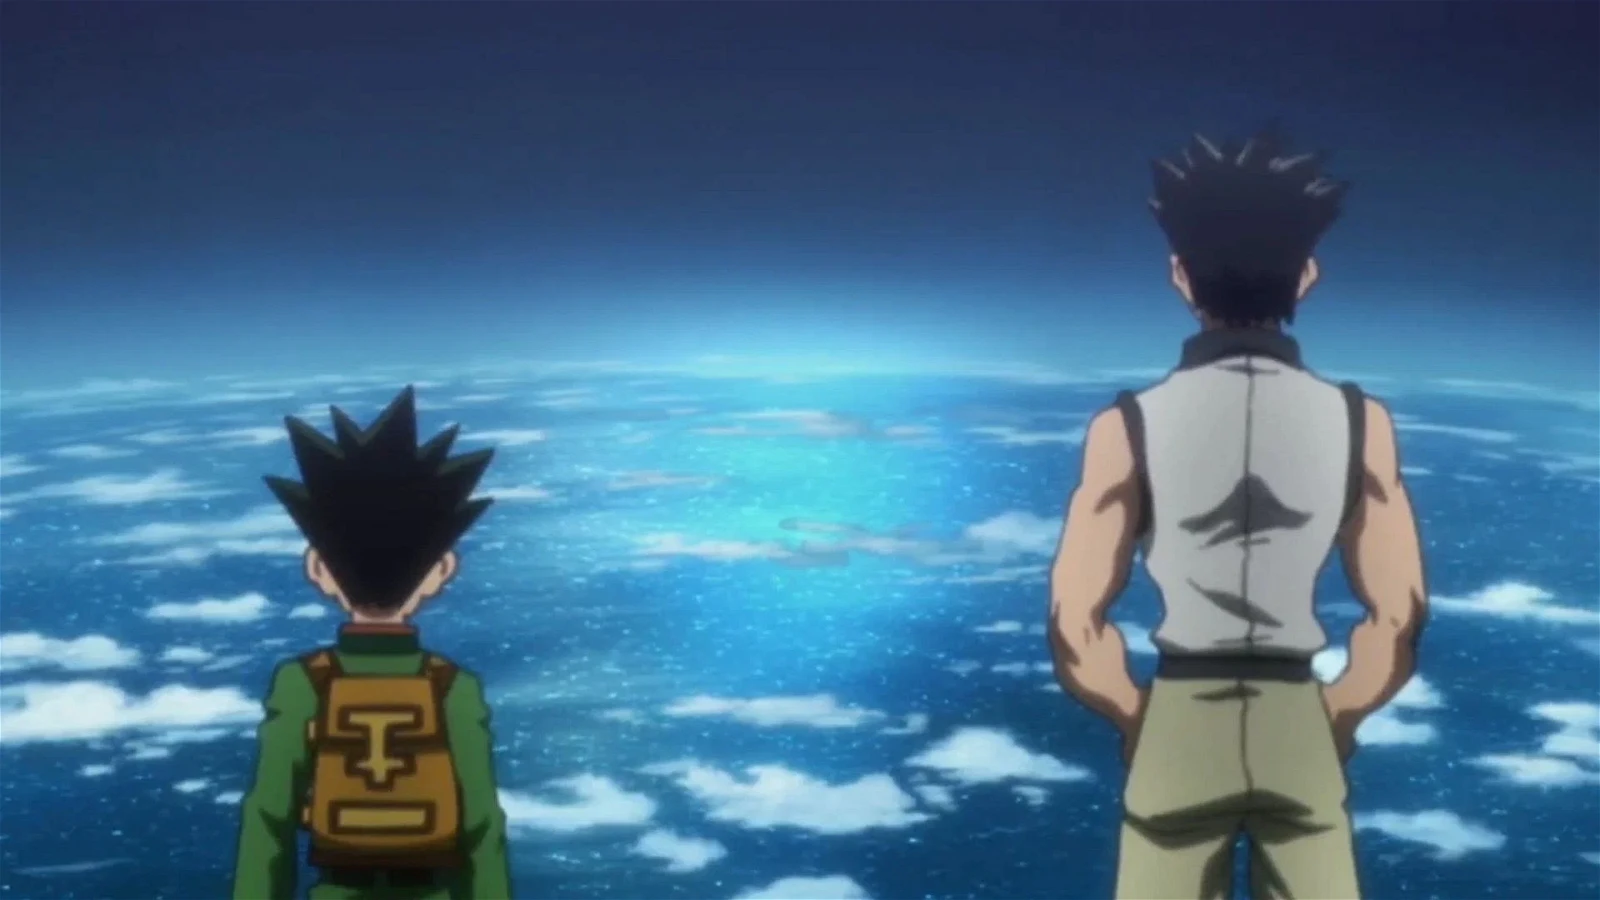 Gon and his father Ging Freecss